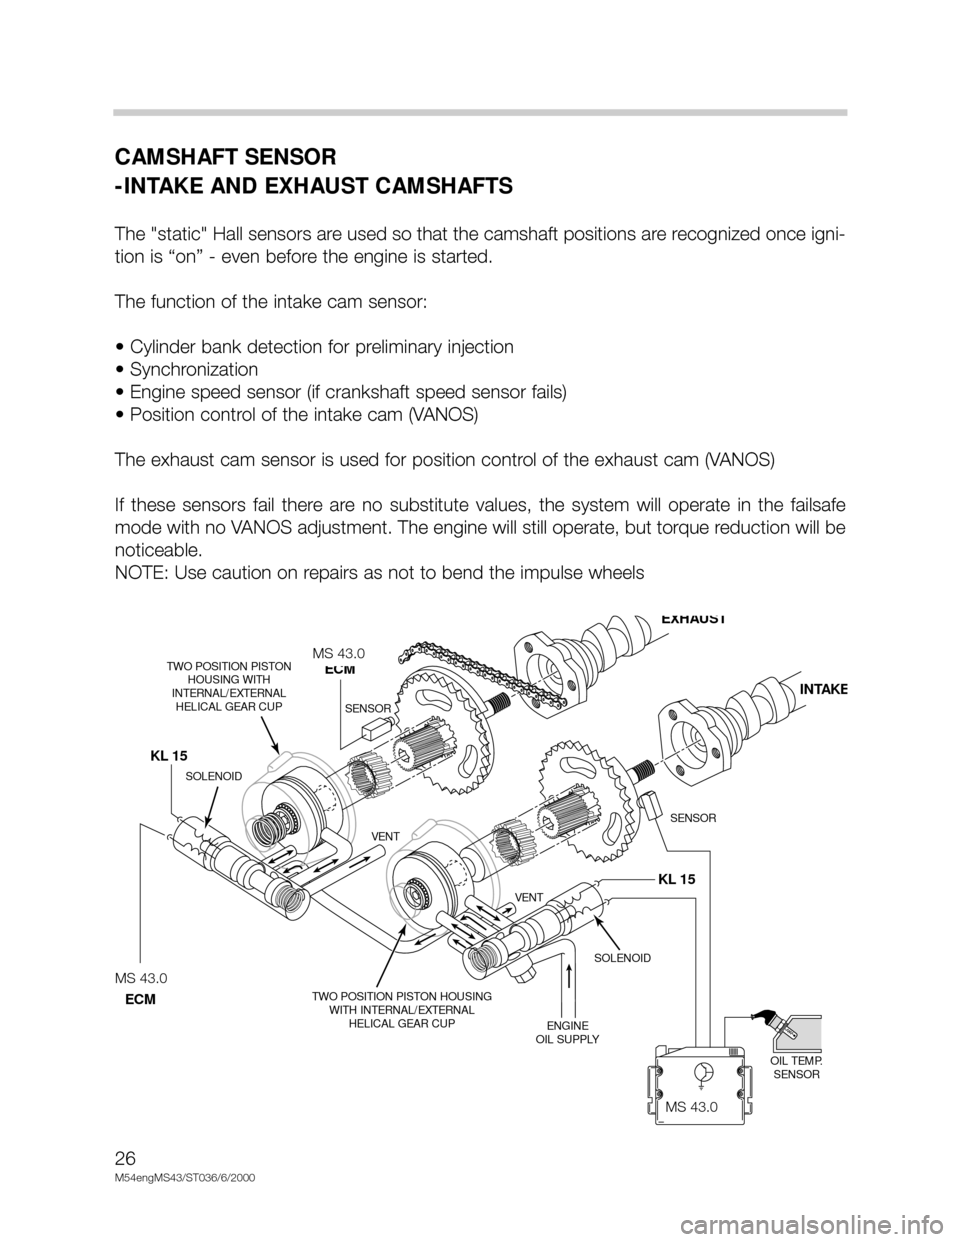 BMW X5 2005 E53 M54 Engine Workshop Manual 26
M54engMS43/ST036/6/2000
CAMSHAFT SENSOR
-INTAKE AND EXHAUST CAMSHAFTS
The "static" Hall sensors are used so that the camshaft positions are recognized once igni-
tion is “on” - even before the 